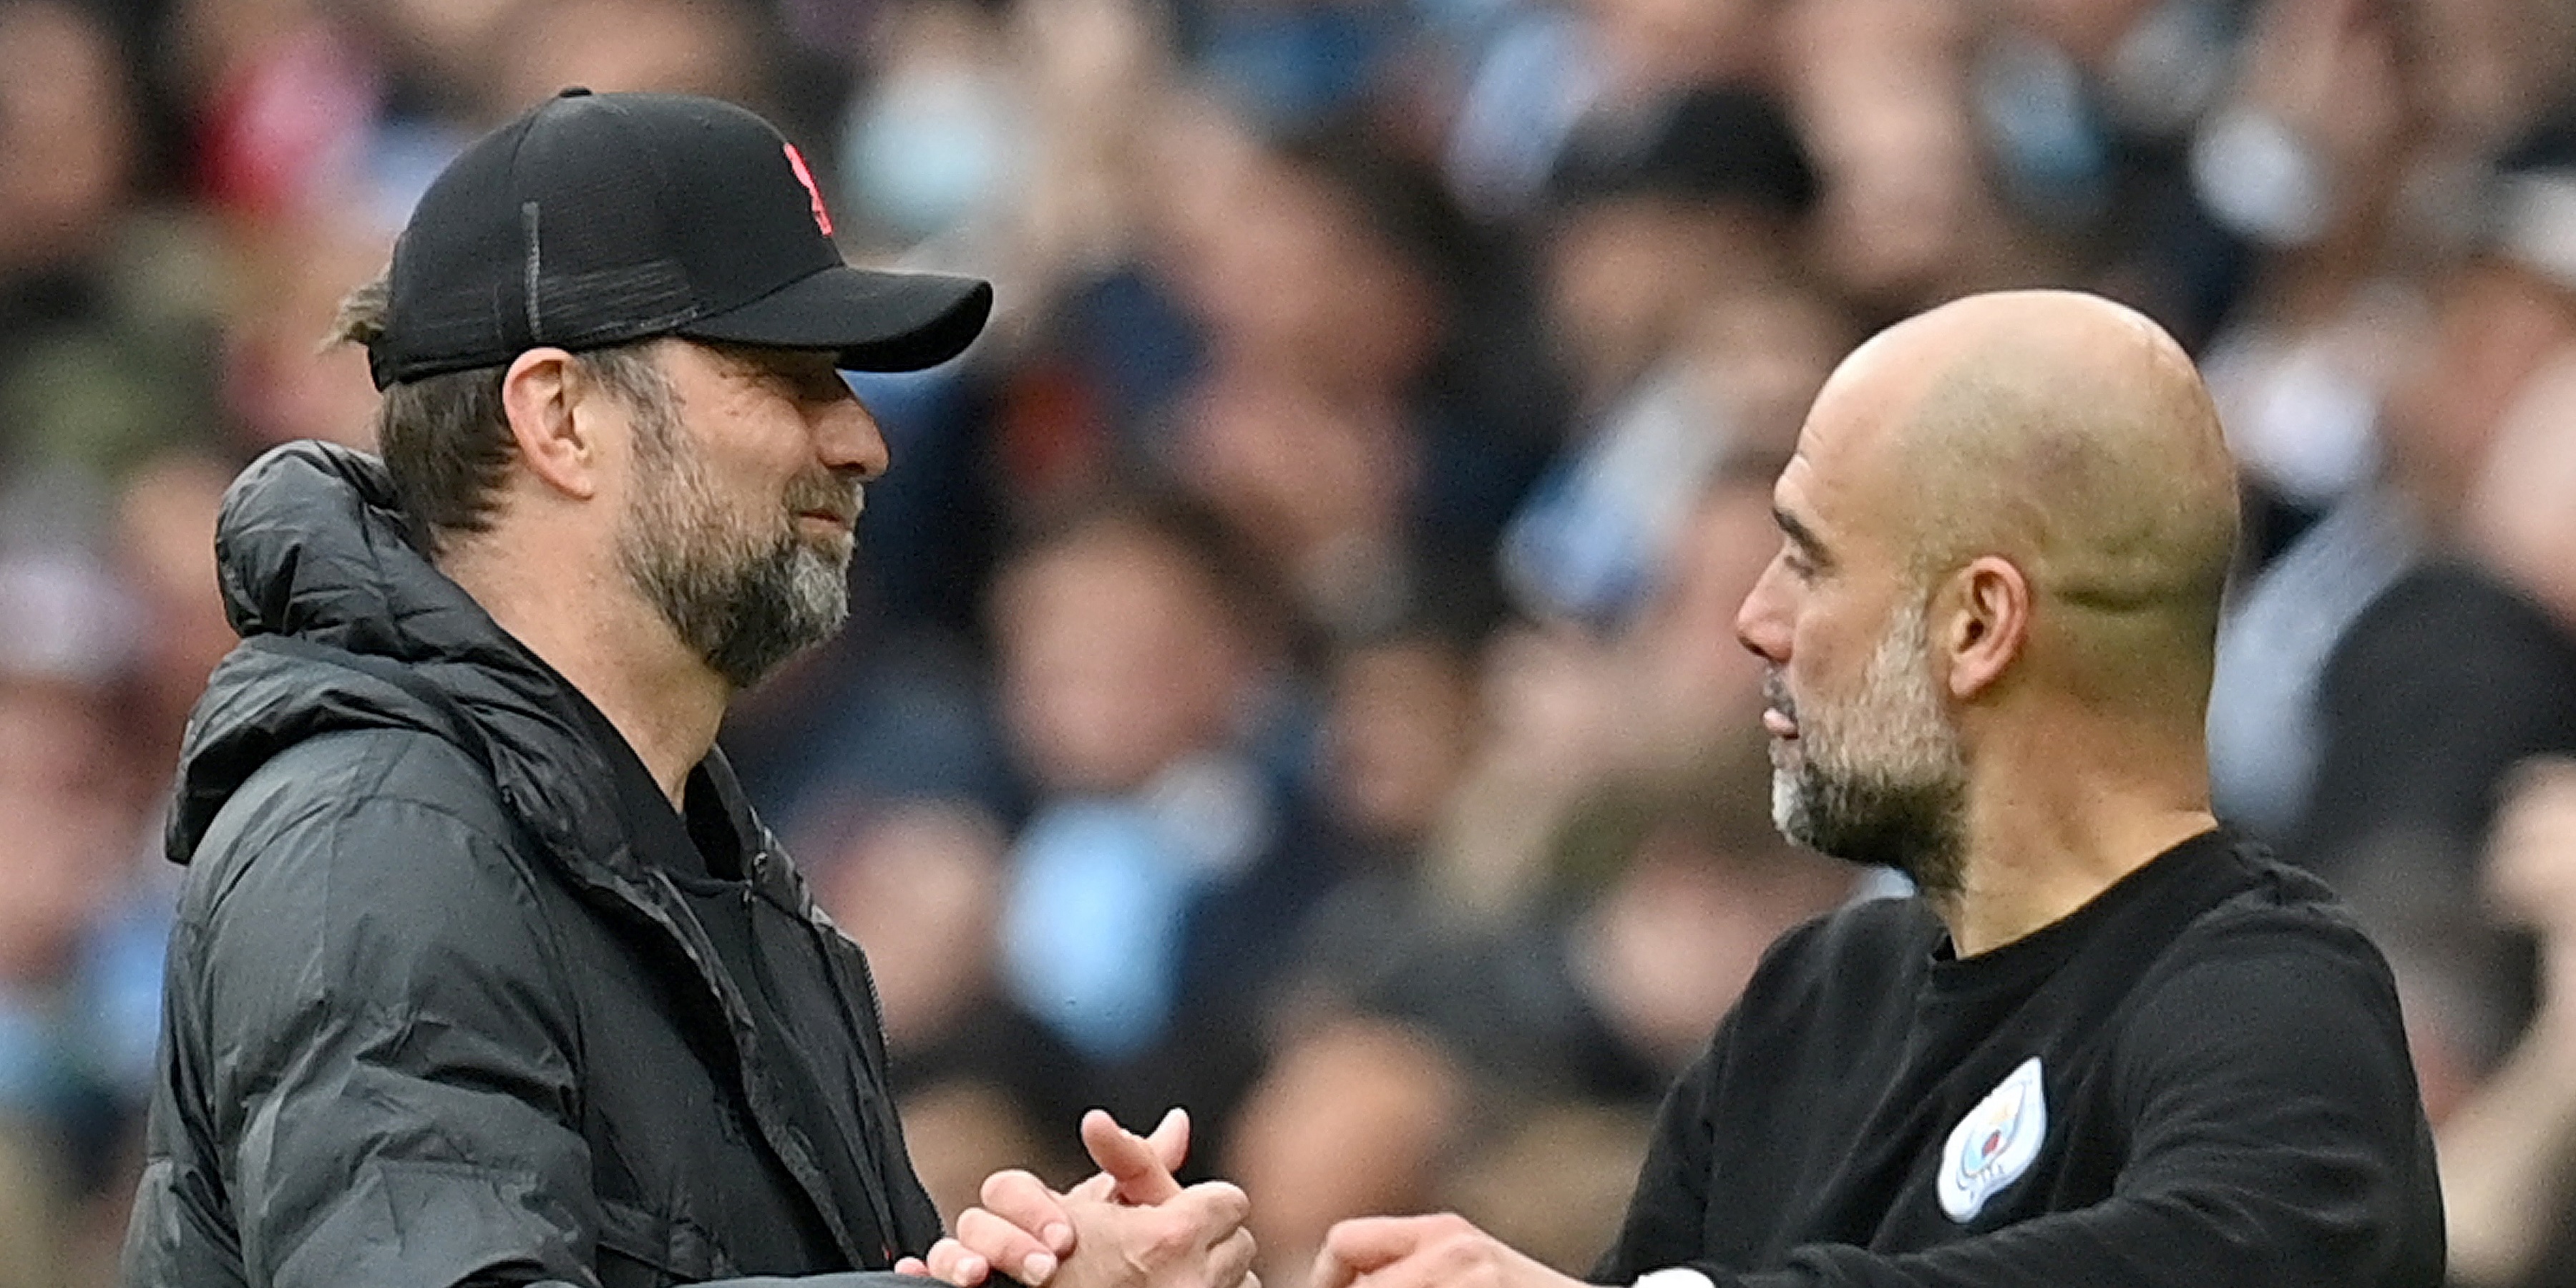 Pep Guardiola admits he has ‘copied’ aspects of Jurgen Klopp’s Liverpool to help develop his Manchester City side